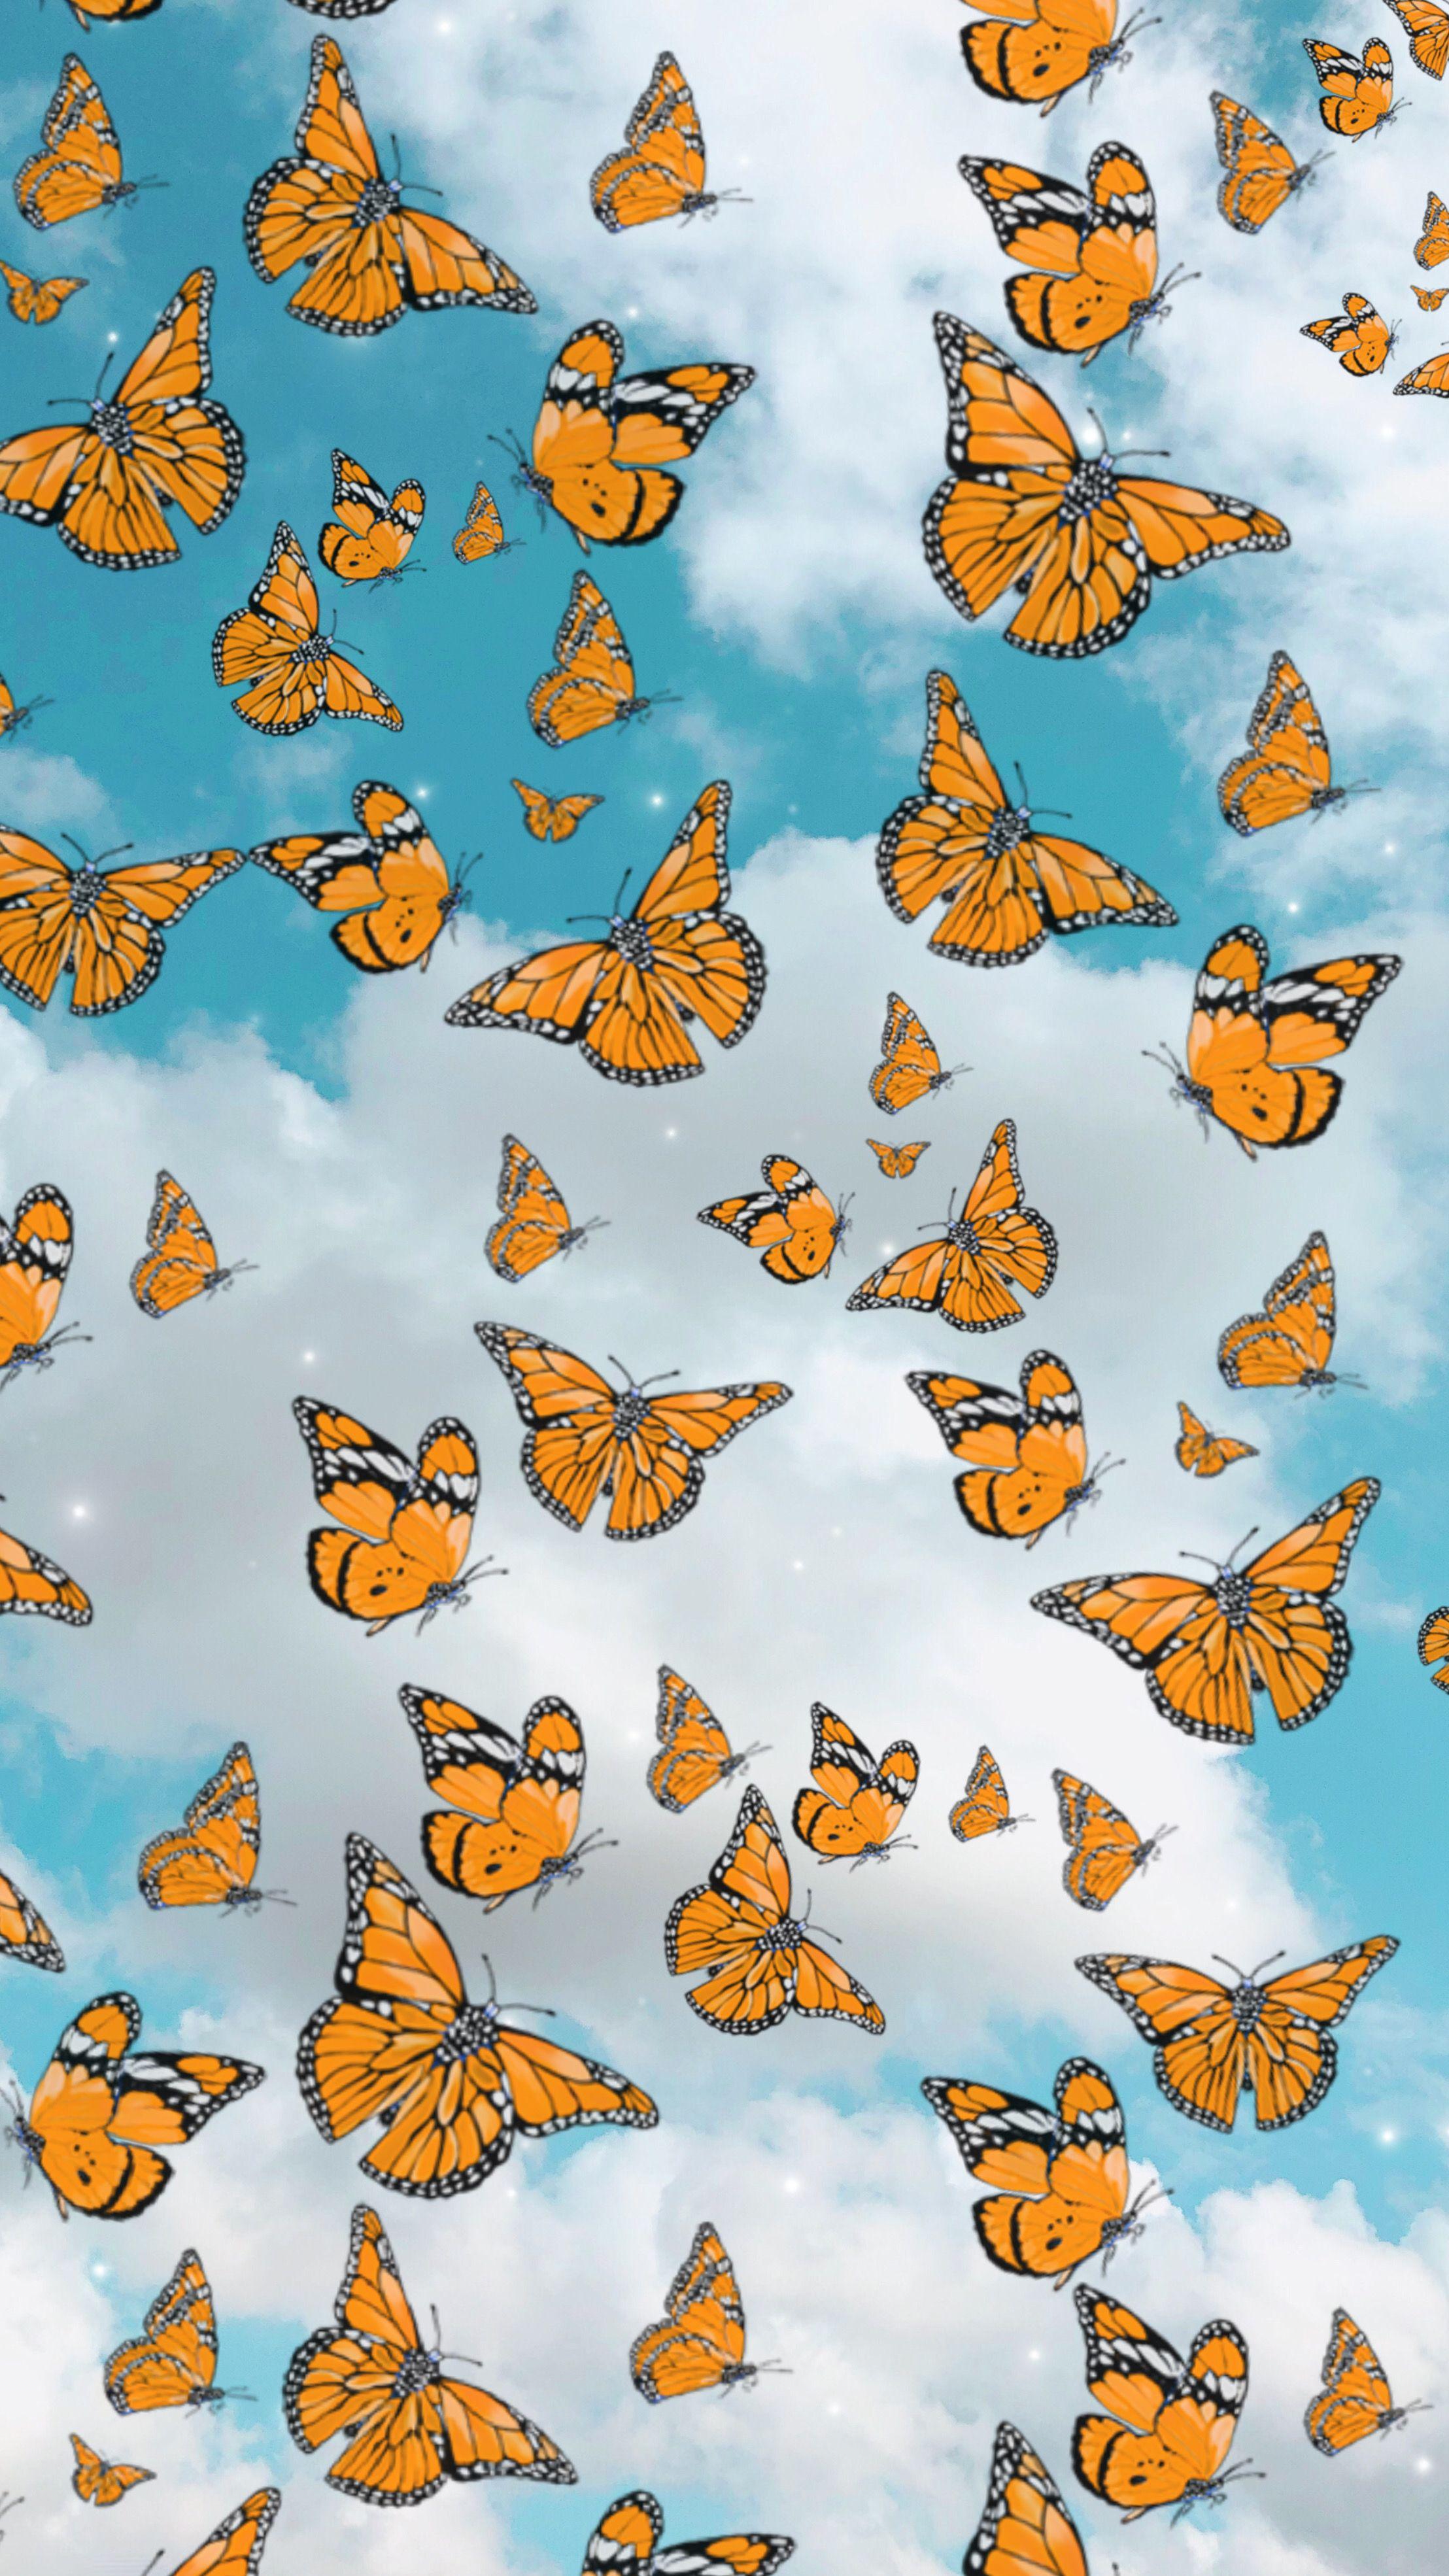 Orange Butterfly Iphone Wallpapers Top Free Orange Butterfly Iphone Backgrounds Wallpaperaccess